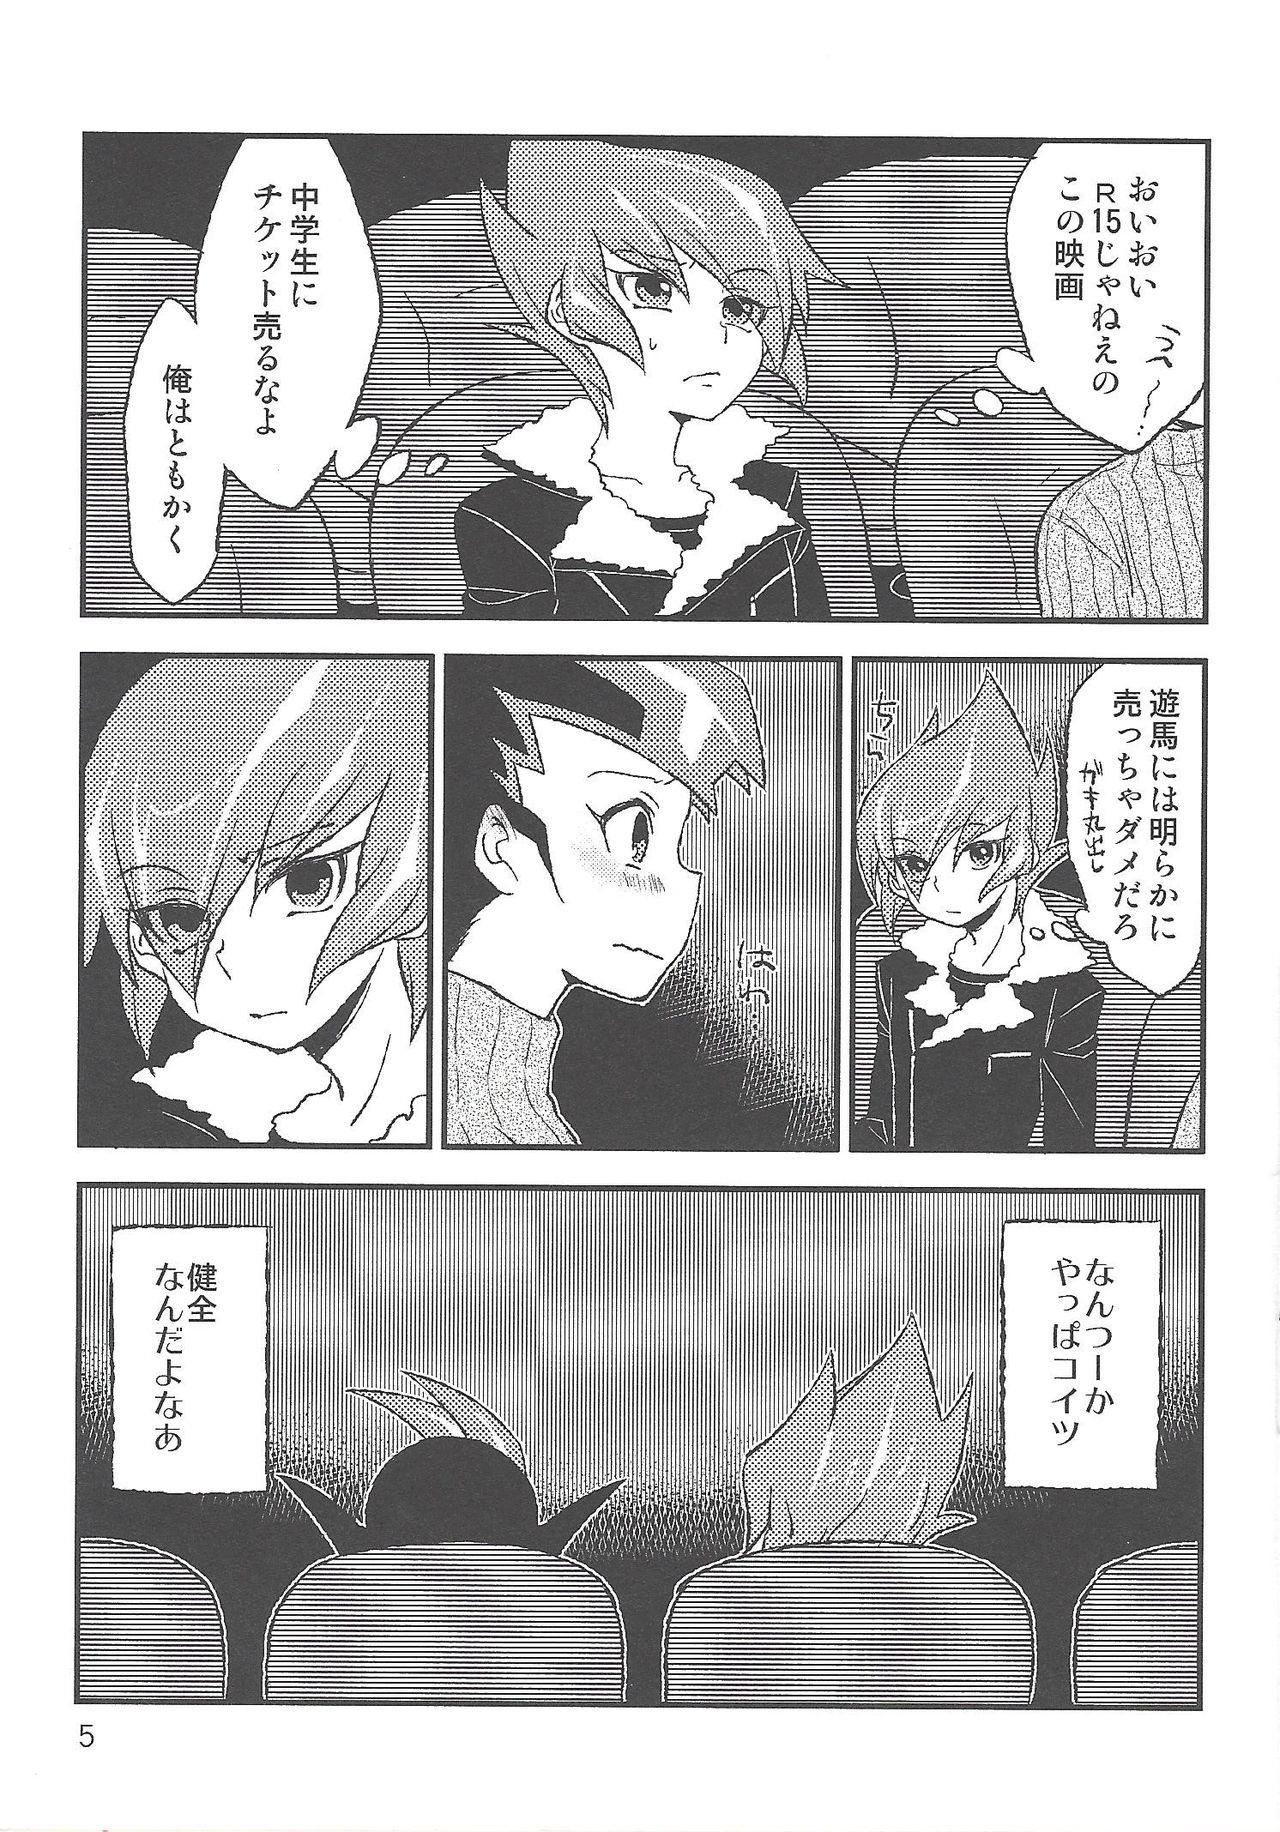 Virgin INSTANT ROOM - Yu-gi-oh zexal Babe - Page 6